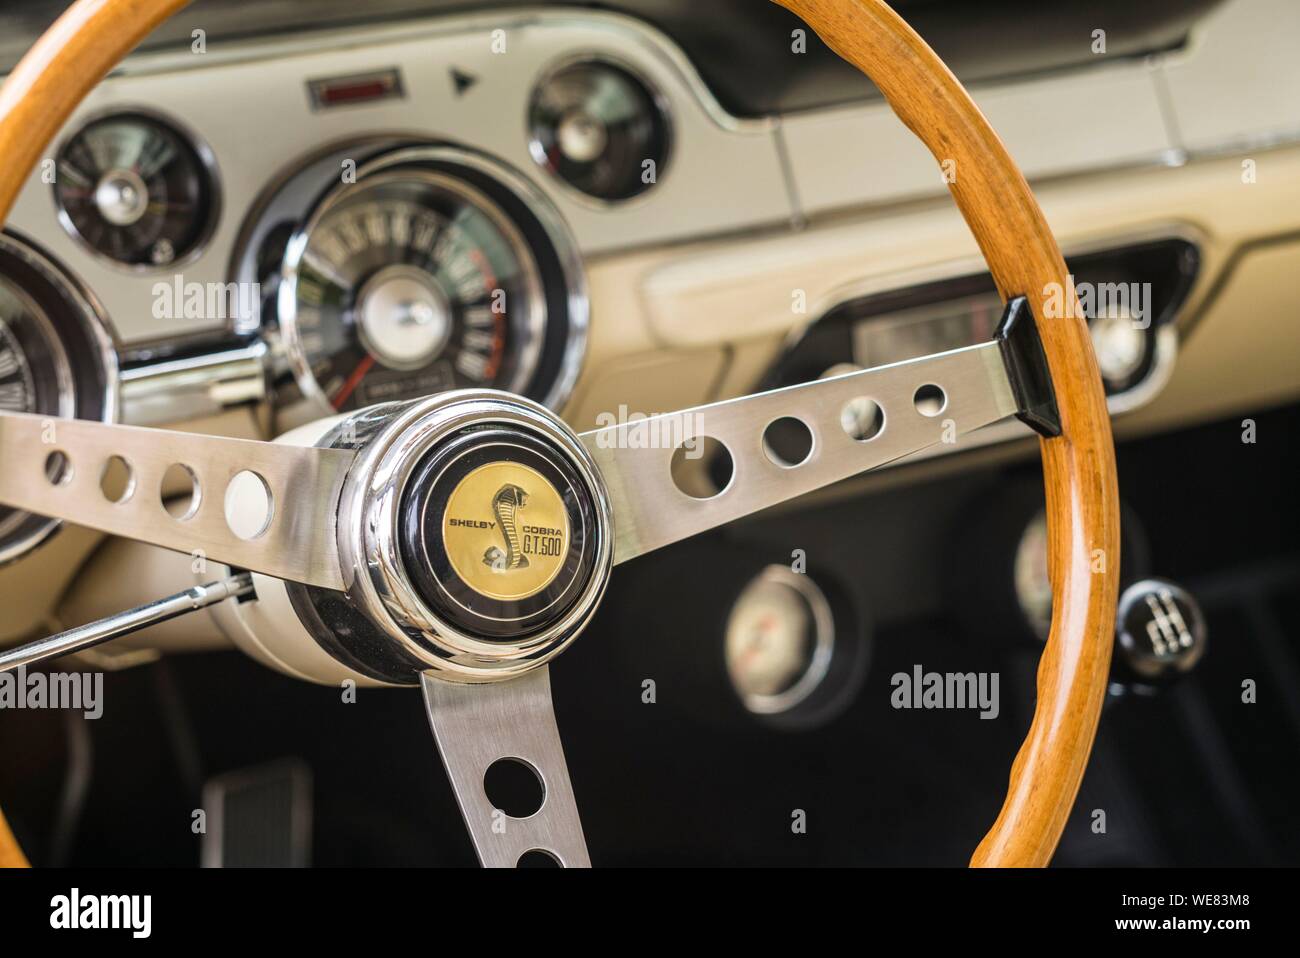 United States, New England, Massachusetts, Essex, antique cars, Shelby Cobra GT 500, steering wheel interior detail Stock Photo